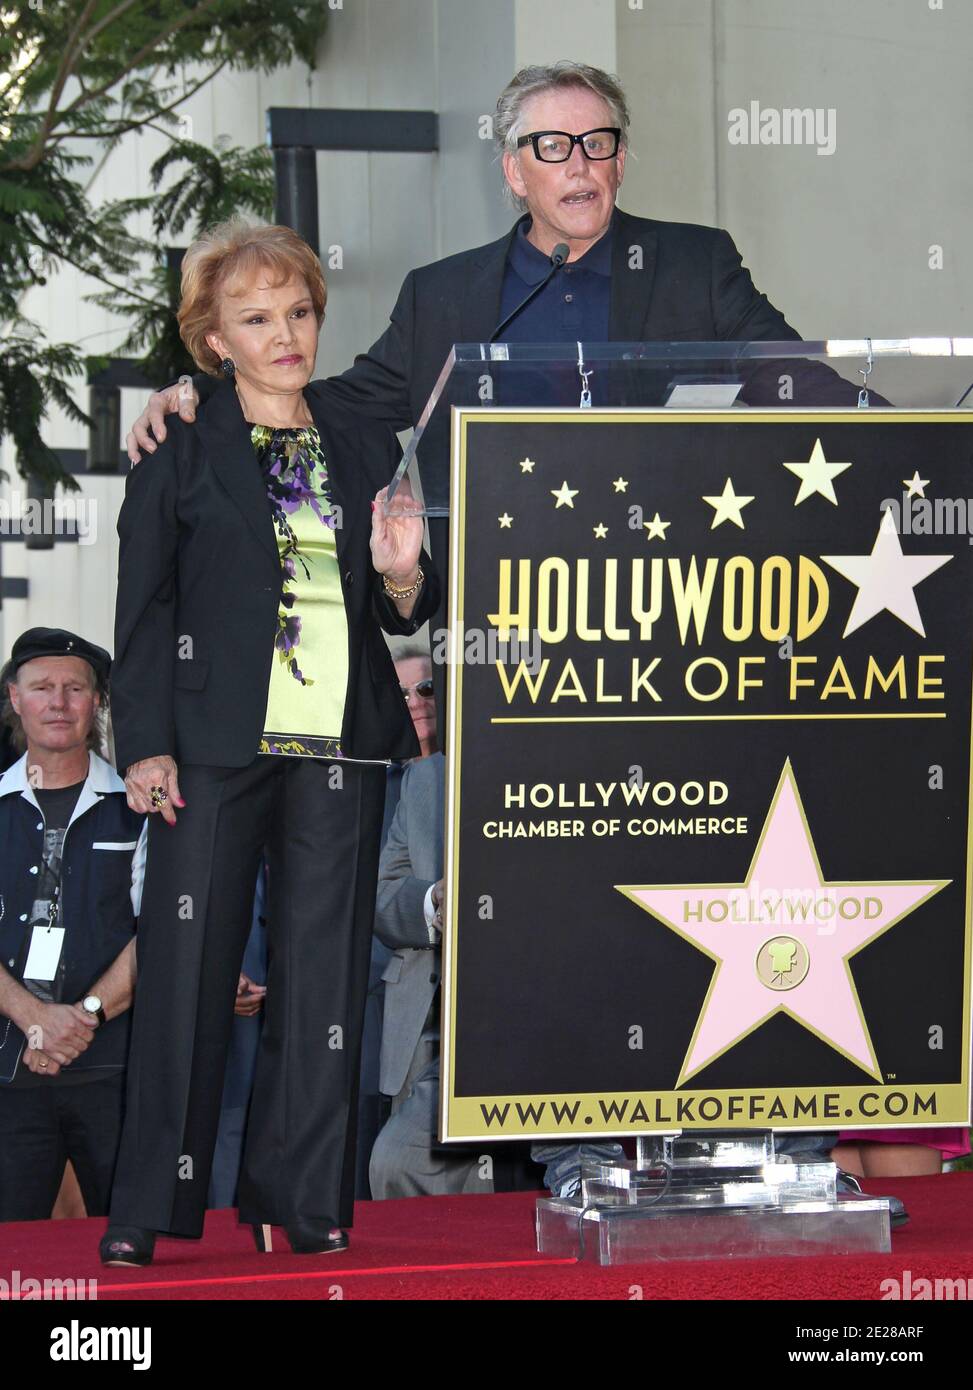 Maria Elena Holly, Gary Busey as Buddy Holly is honored on the Hollywood Walk of Fame in front of the Capital Records Building, Hollywood, California. September 7, 2011. (Pictured: Maria Elena Holly, Gary Busey). Photo by Baxter/ABACAPRESS.COM Stock Photo